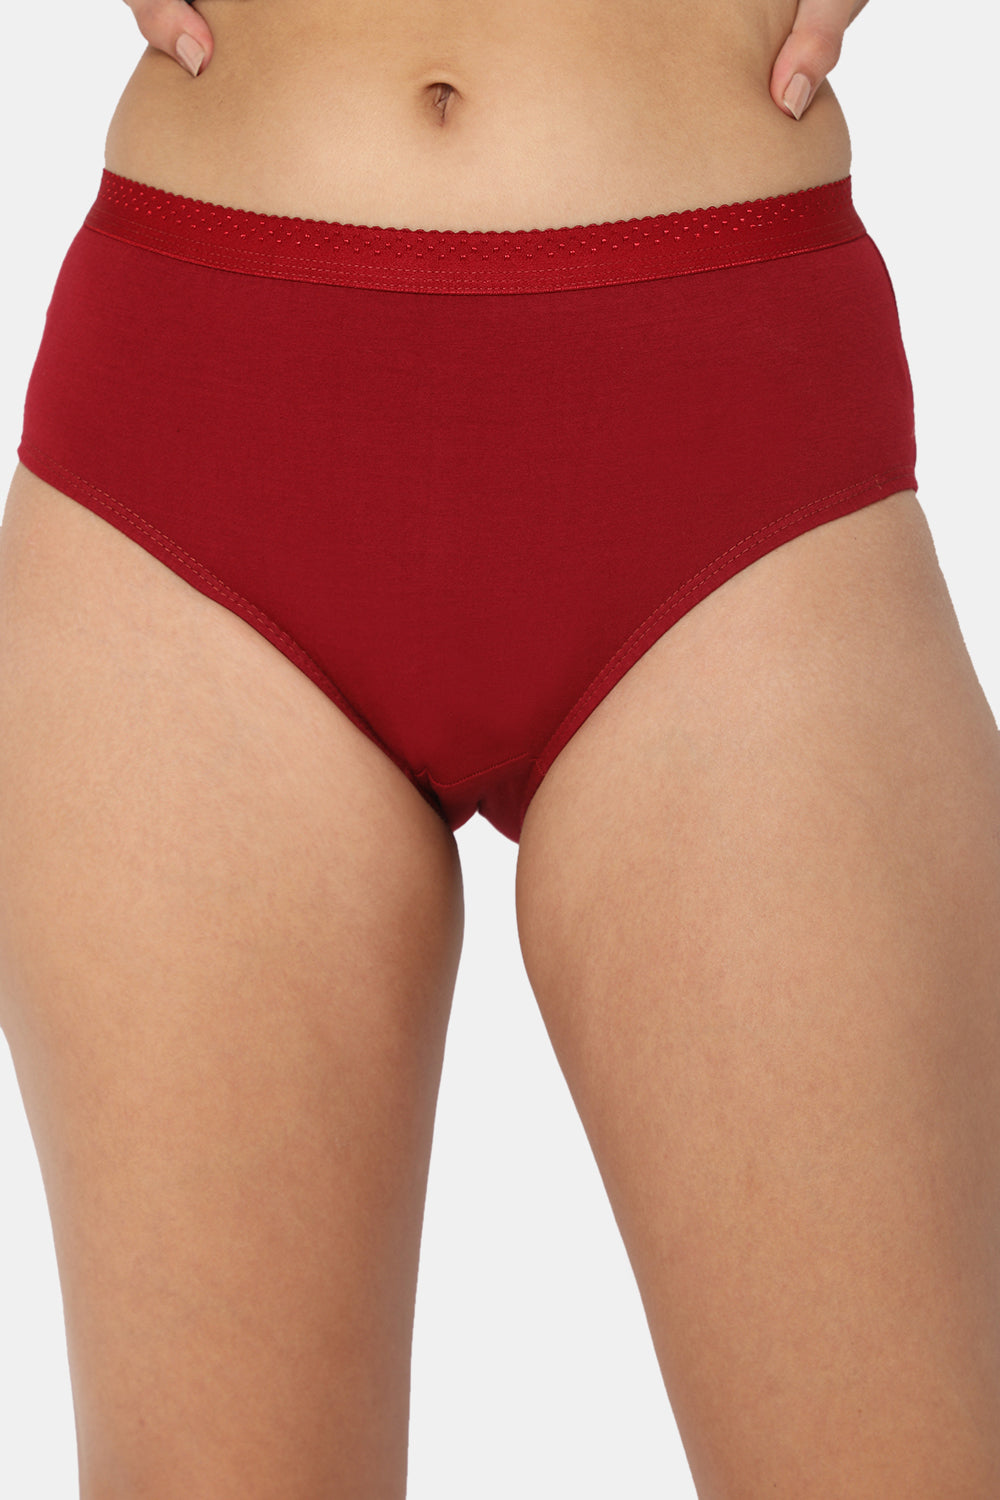 Plain Panty at Rs 40/piece  Pure Cotton Panties For Women in